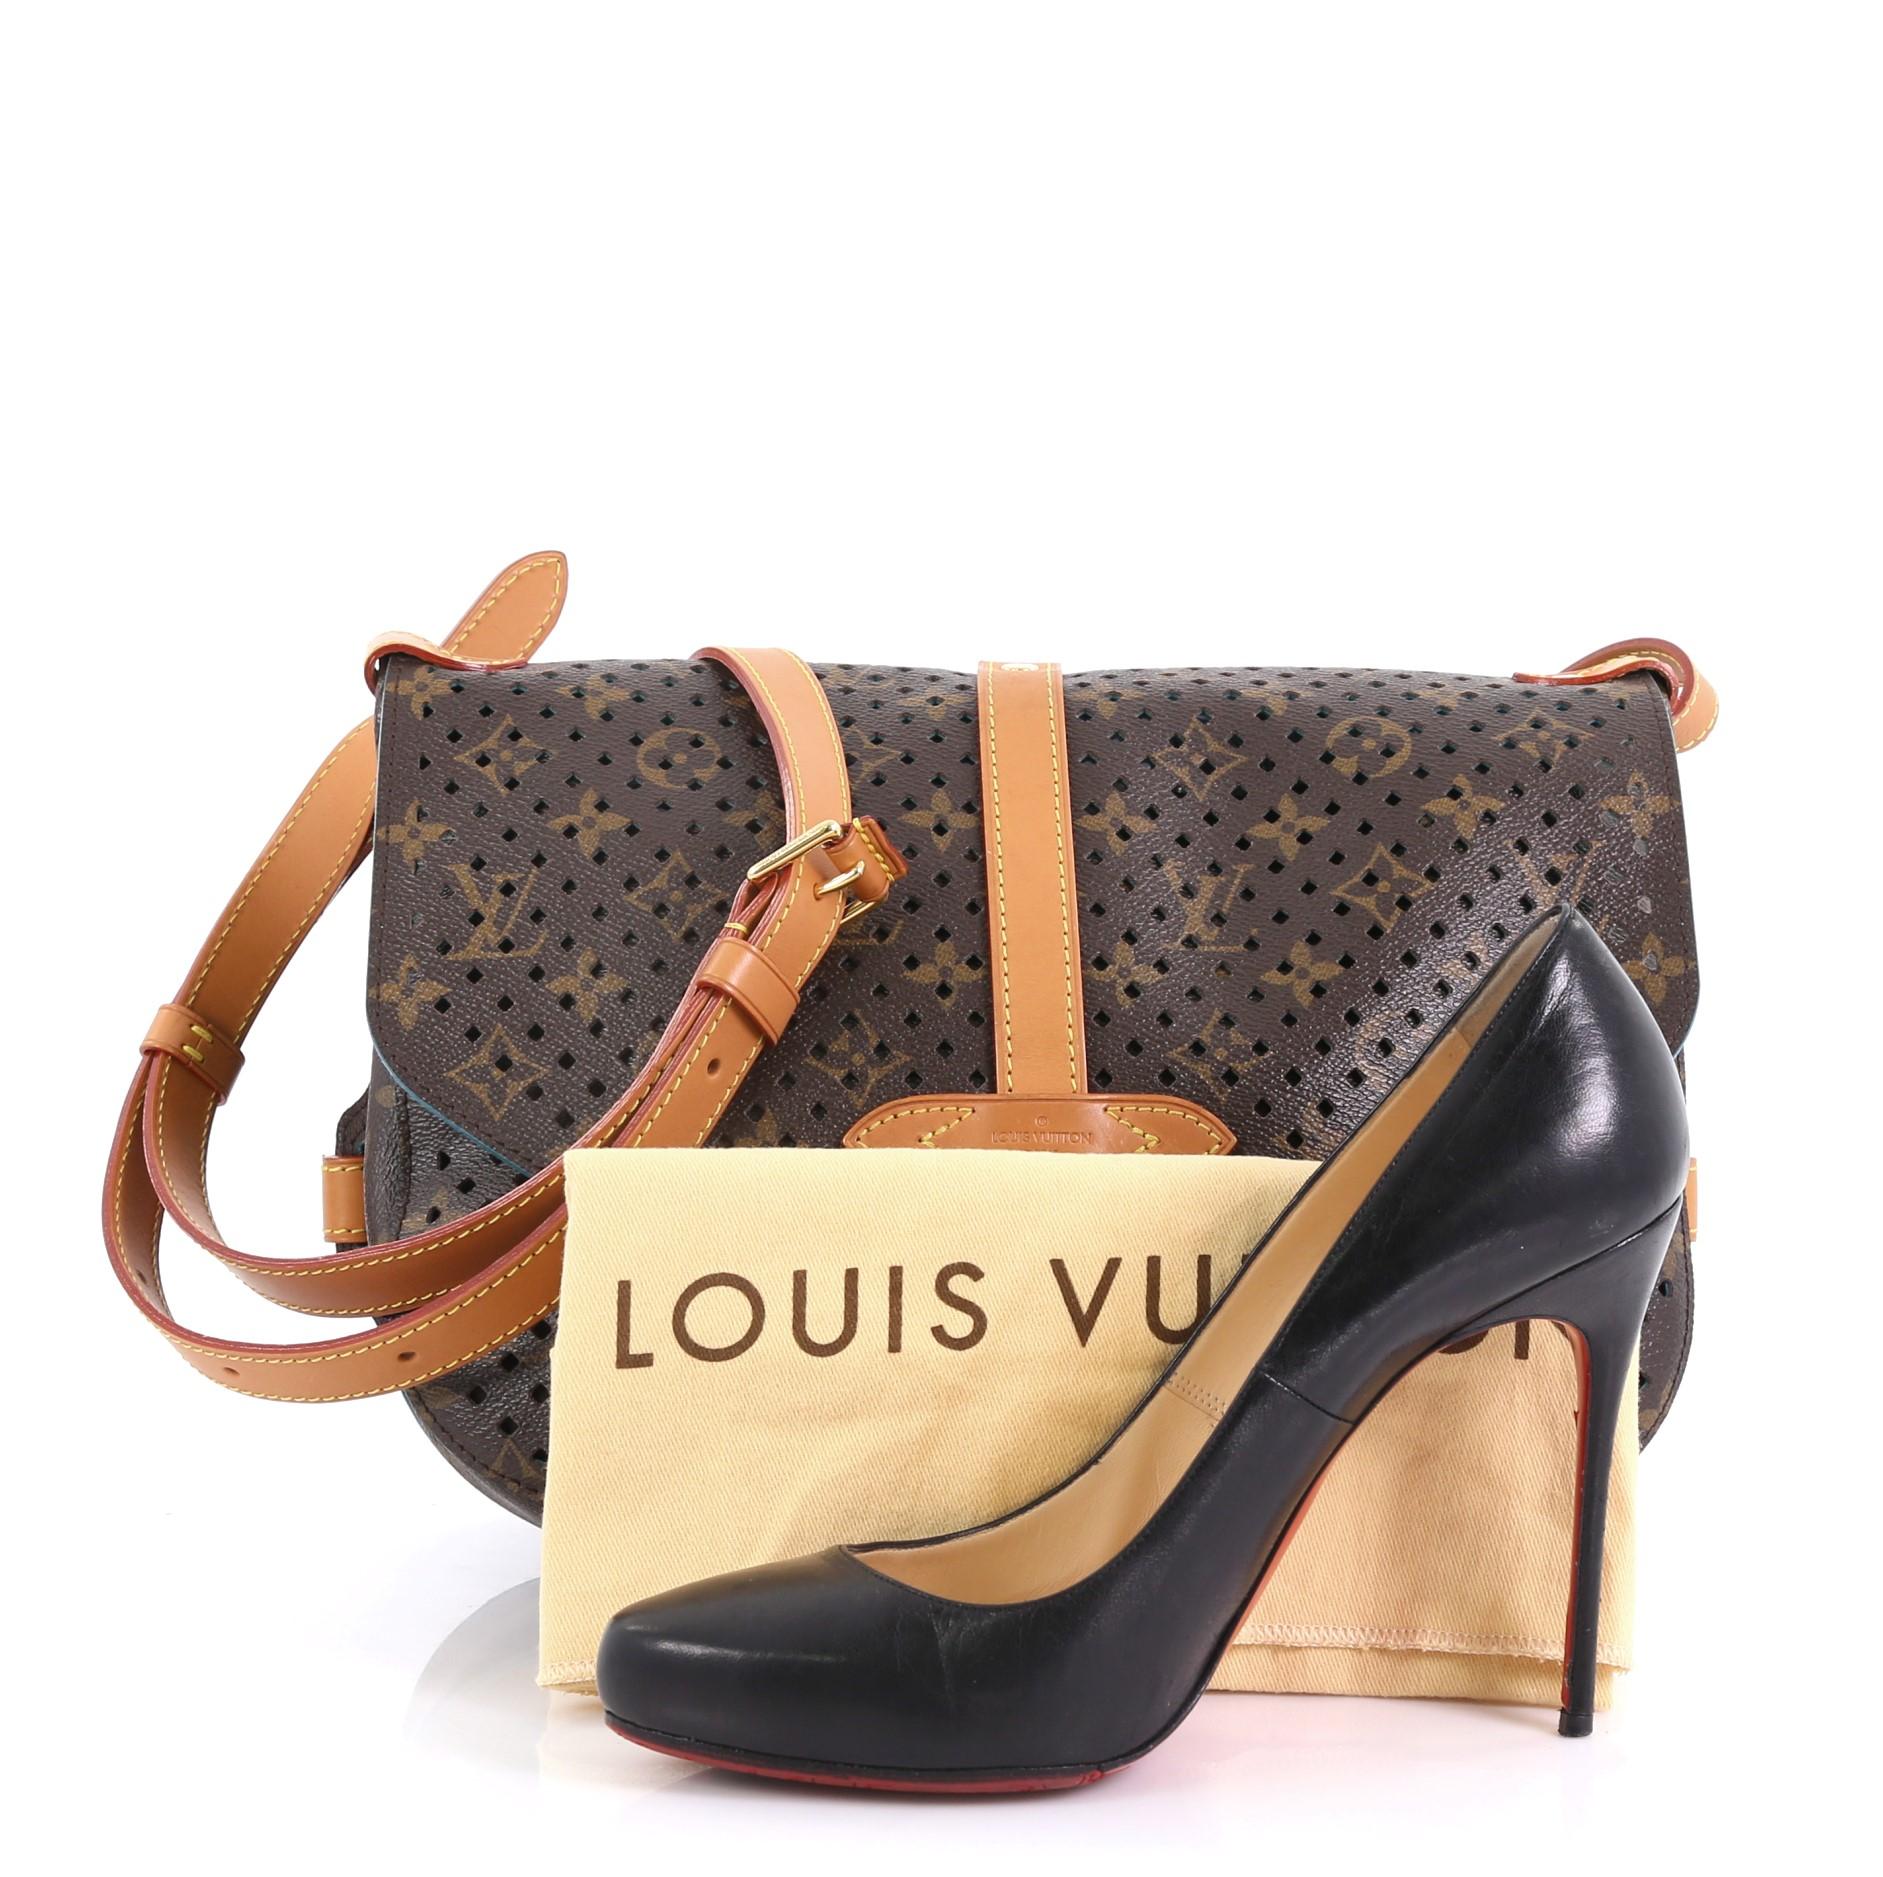 This Louis Vuitton Flore Saumur Handbag Perforated Monogram Canvas, crafted from brown perforated monogram coated canvas, features vachetta leather trims, long adjustable leather strap, double saddle compartments with buckle closures and gold-tone